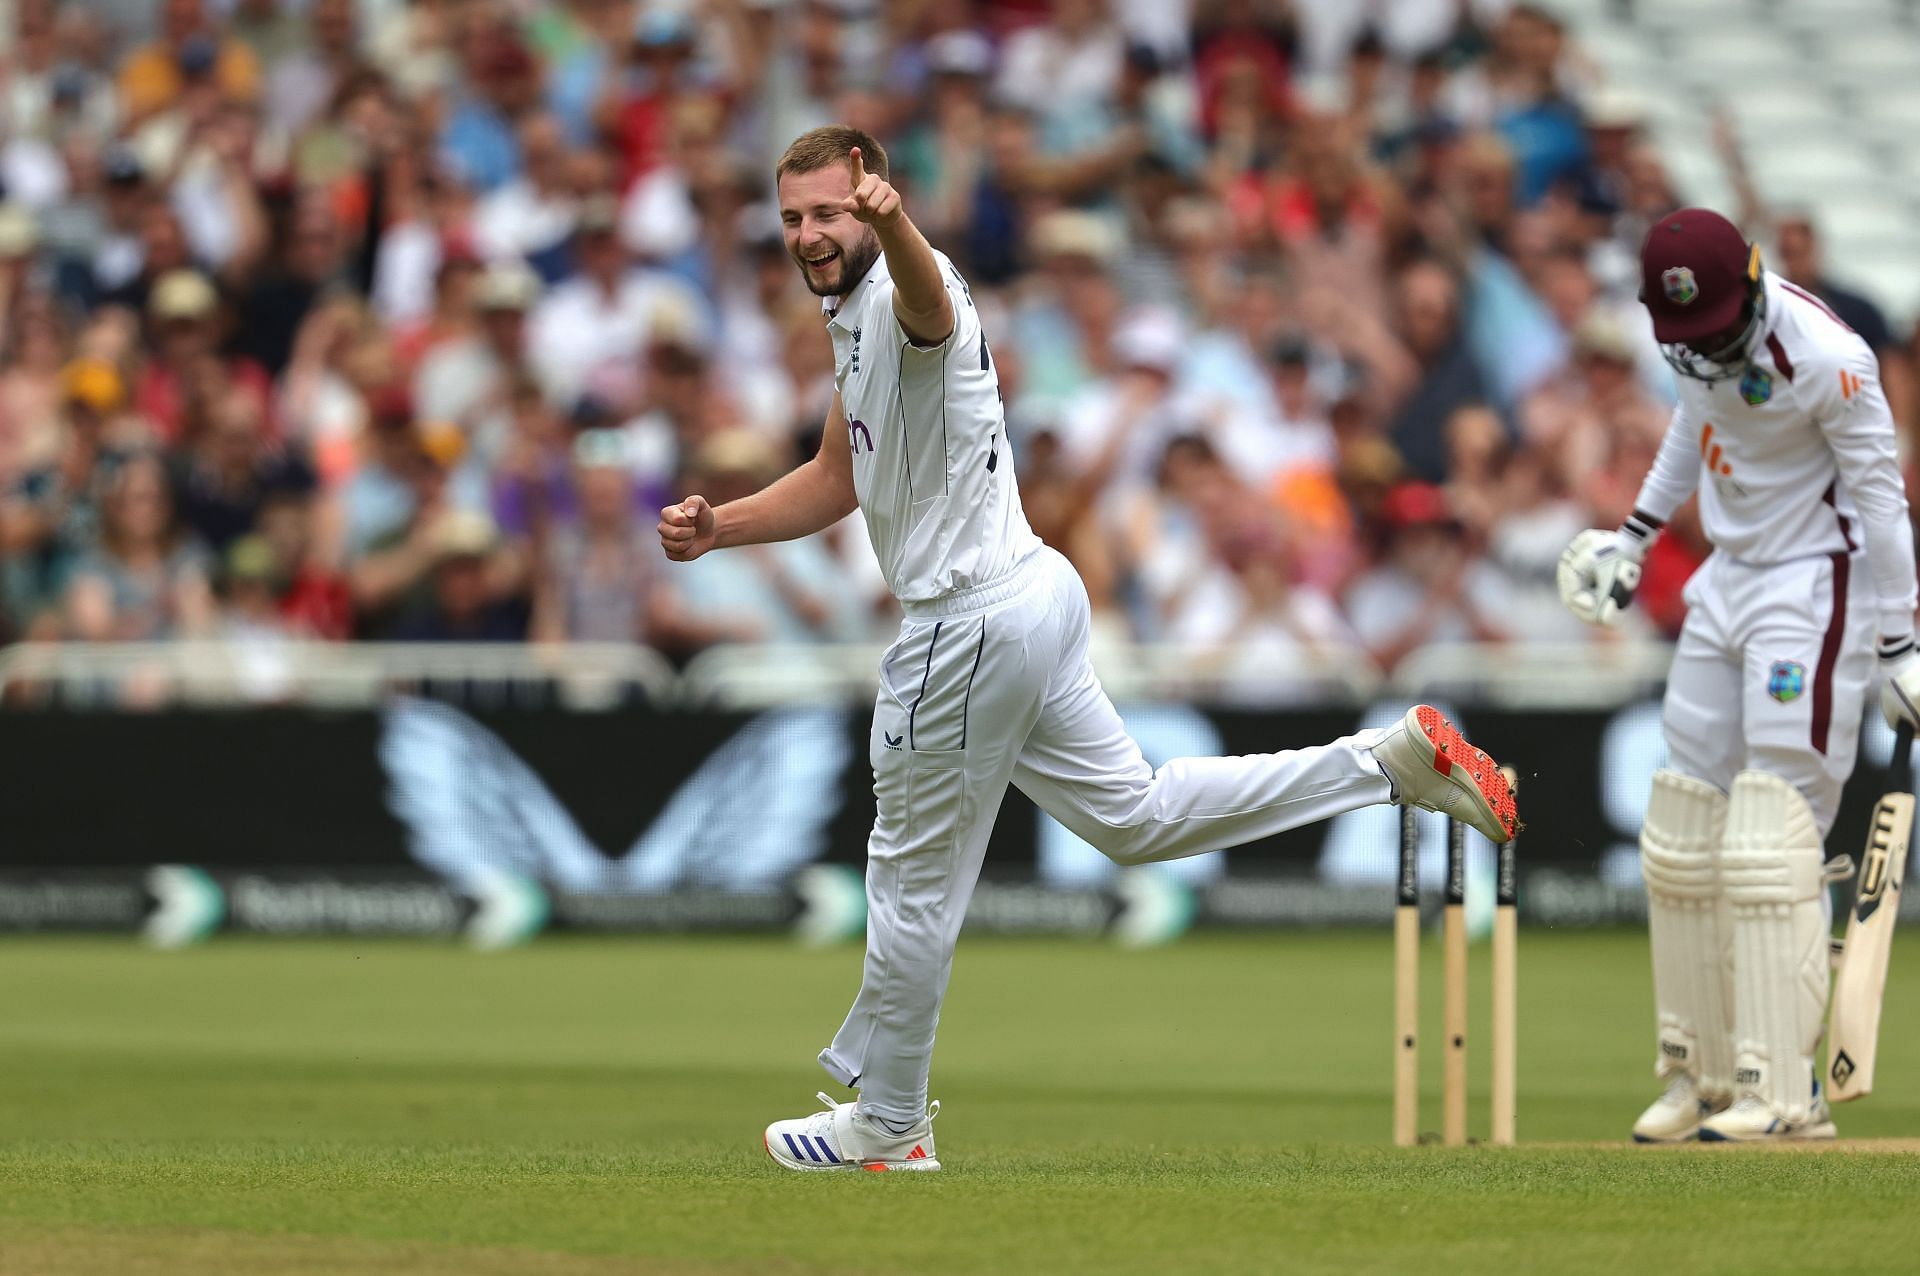 [Watch] Gus Atkinson knocks over Alzarri Joseph with a ripper on Day 4 of ENG vs WI 2nd Test